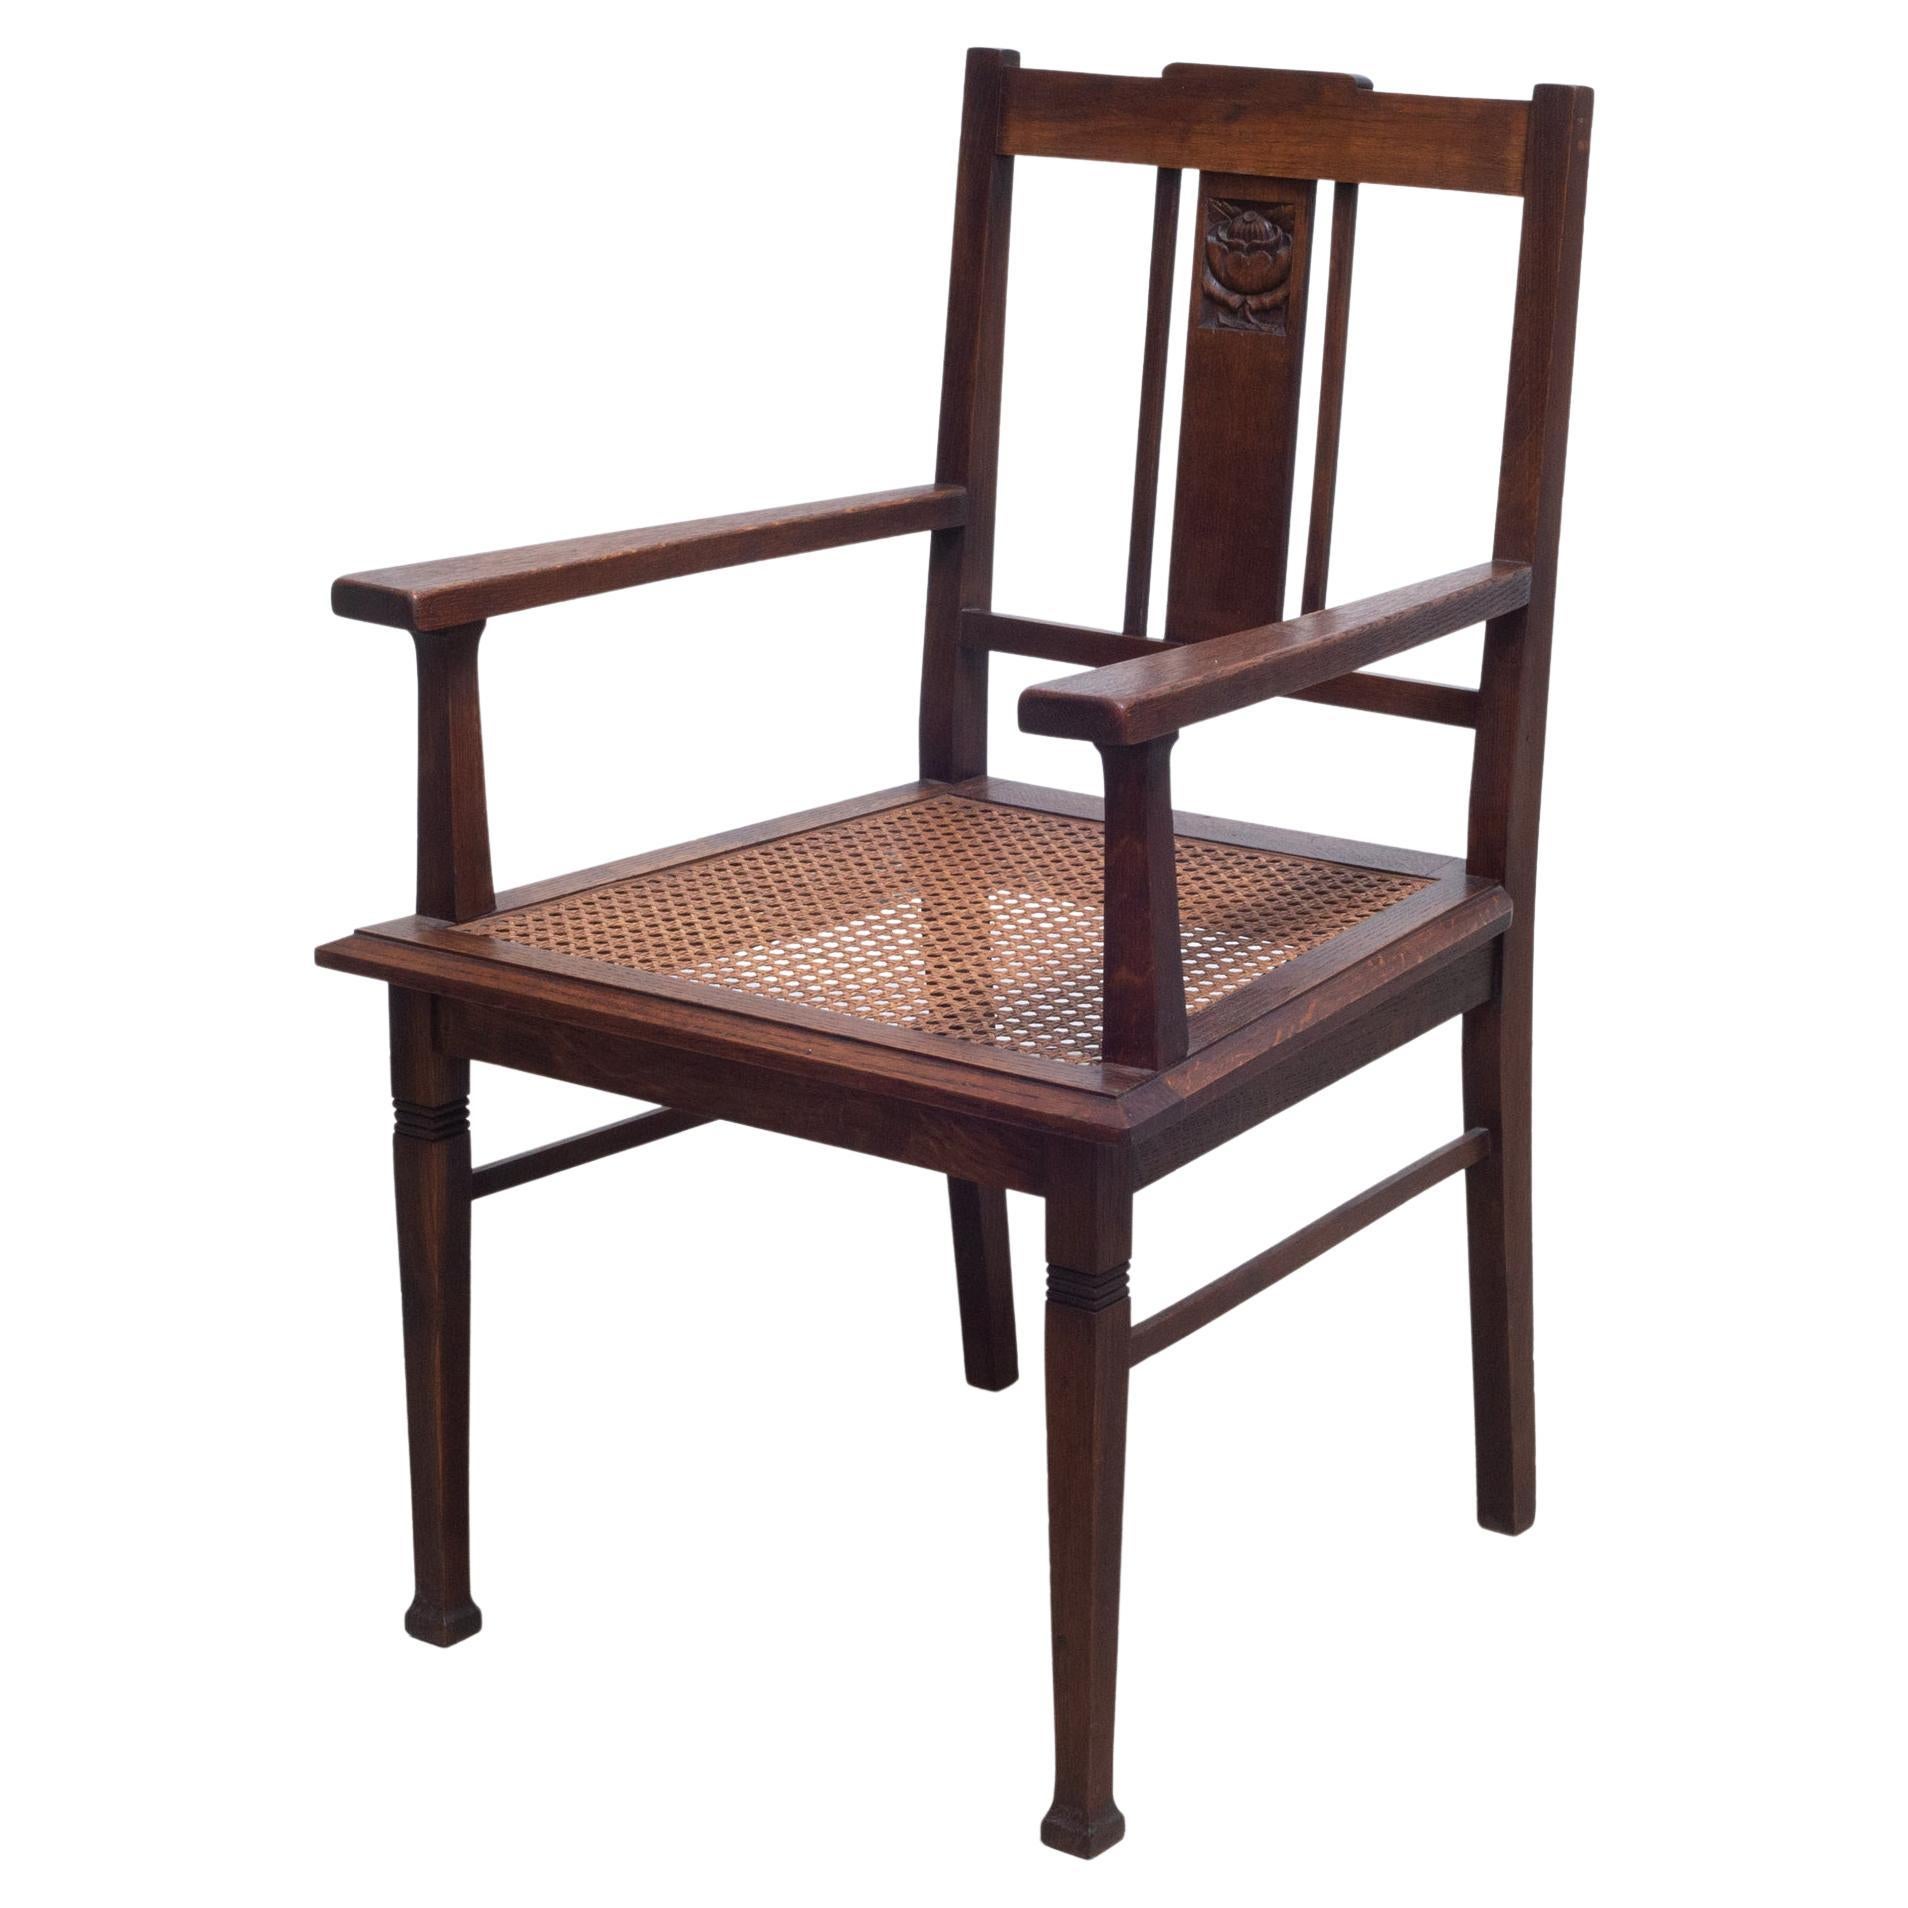 Early 20th C. Glasgow Style Arts and Crafts Caned Oak Arm Chair, c.1900 For Sale